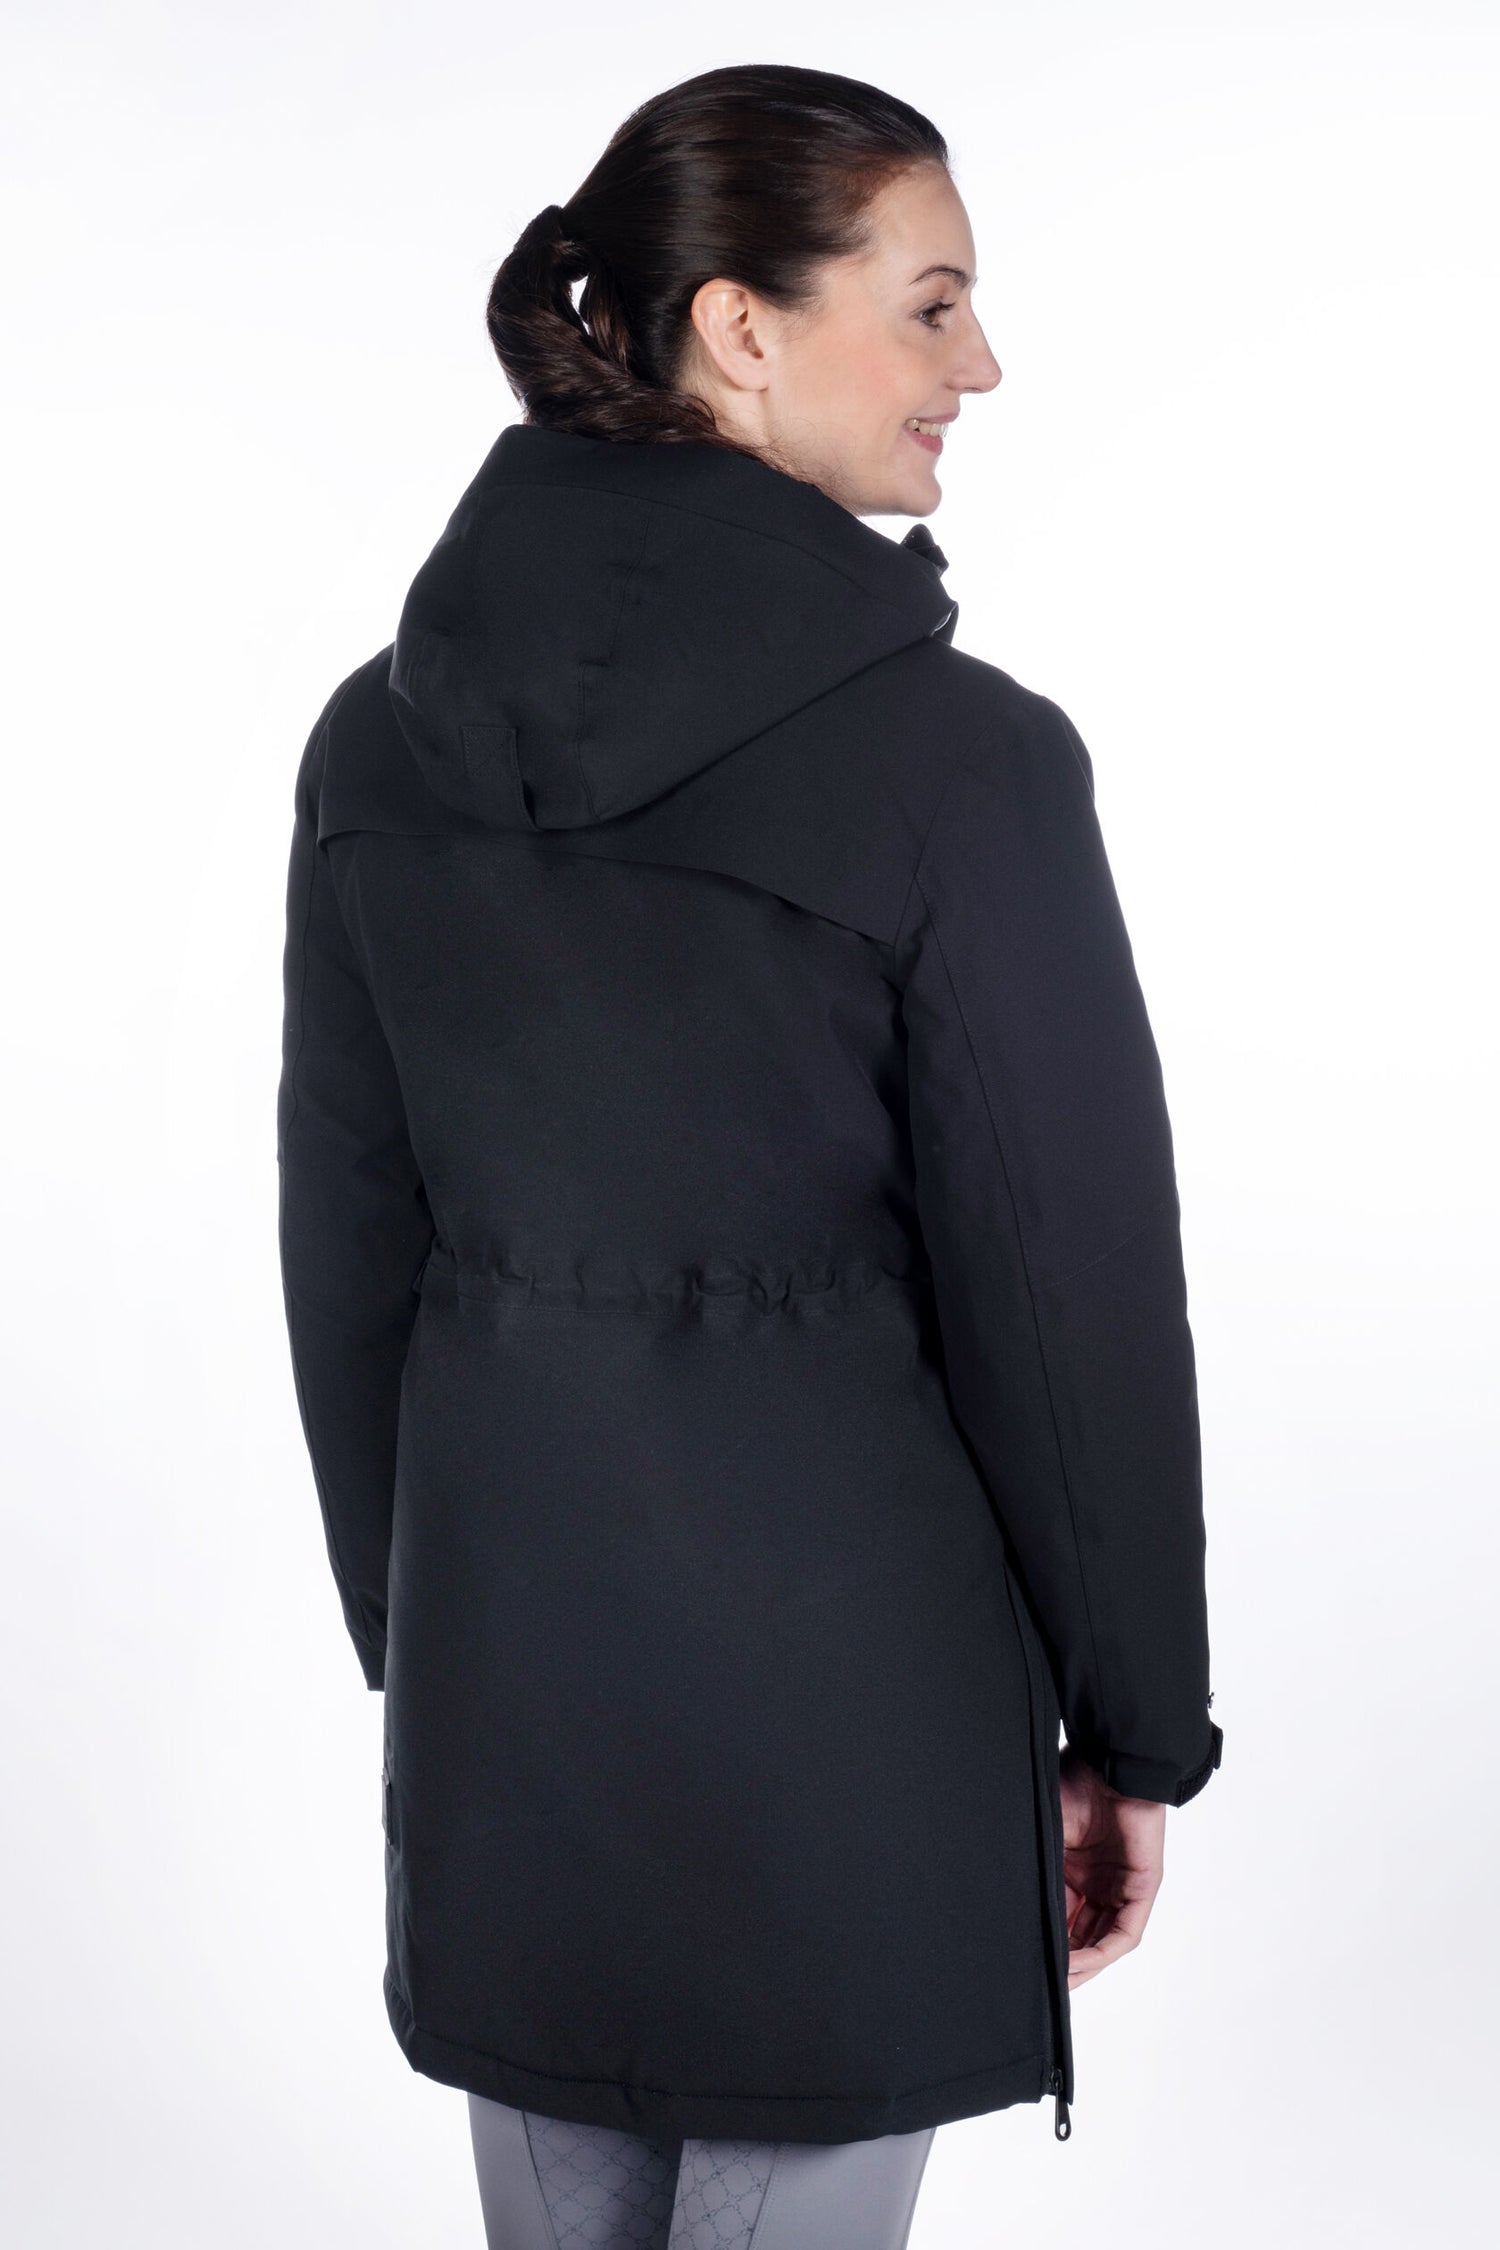 Insulated equestrian jacket